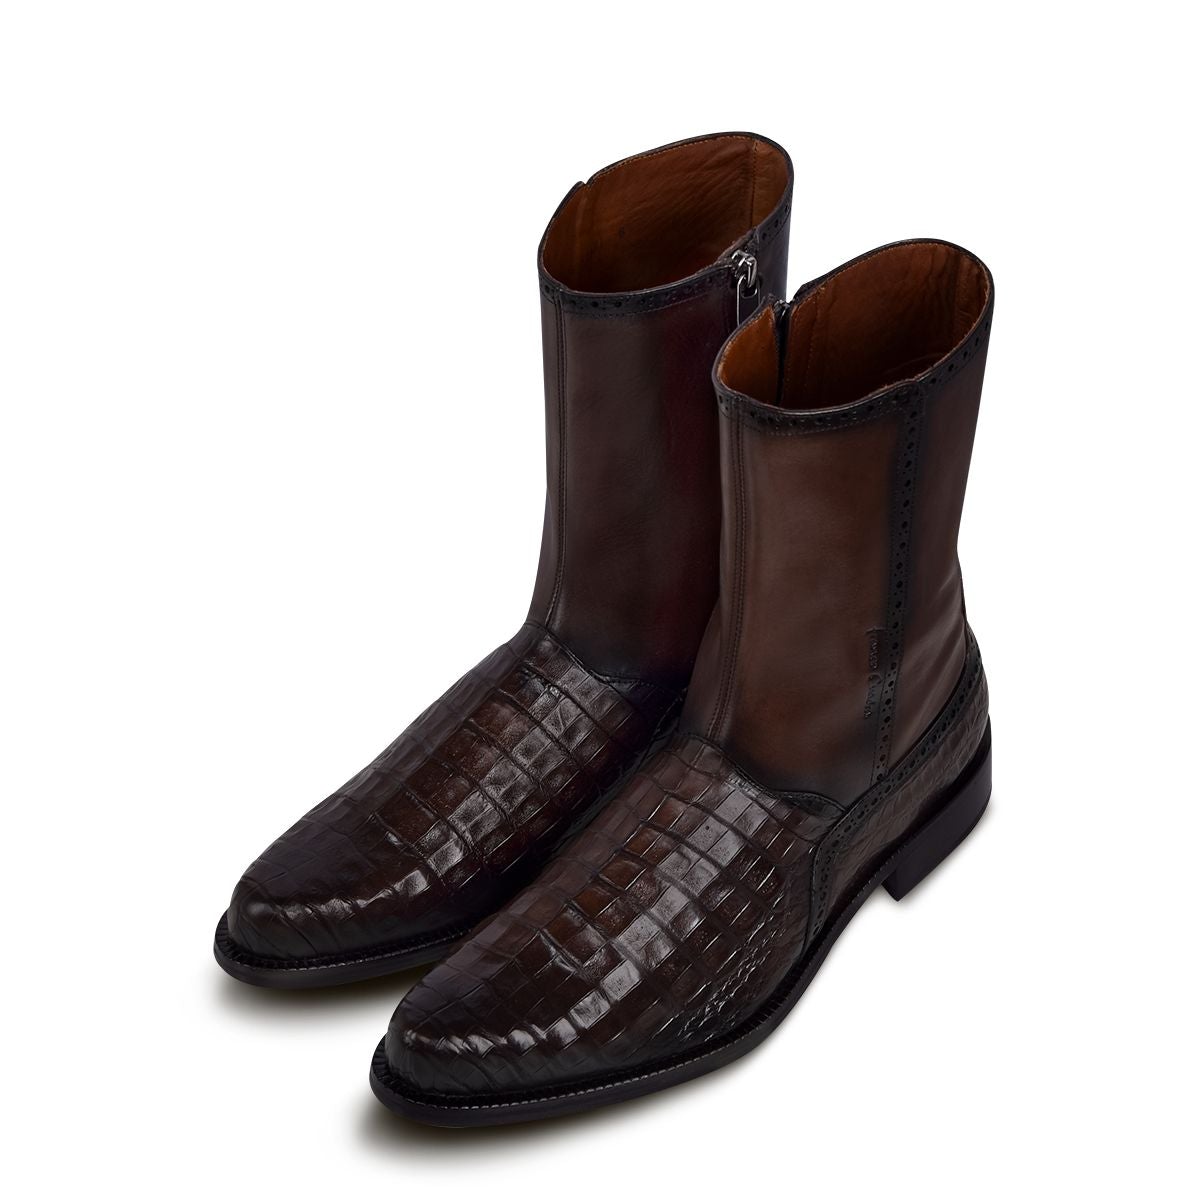 827FWTS - Franco Cuadra brown dress casual caiman leather ankle boots for men-Kuet.us